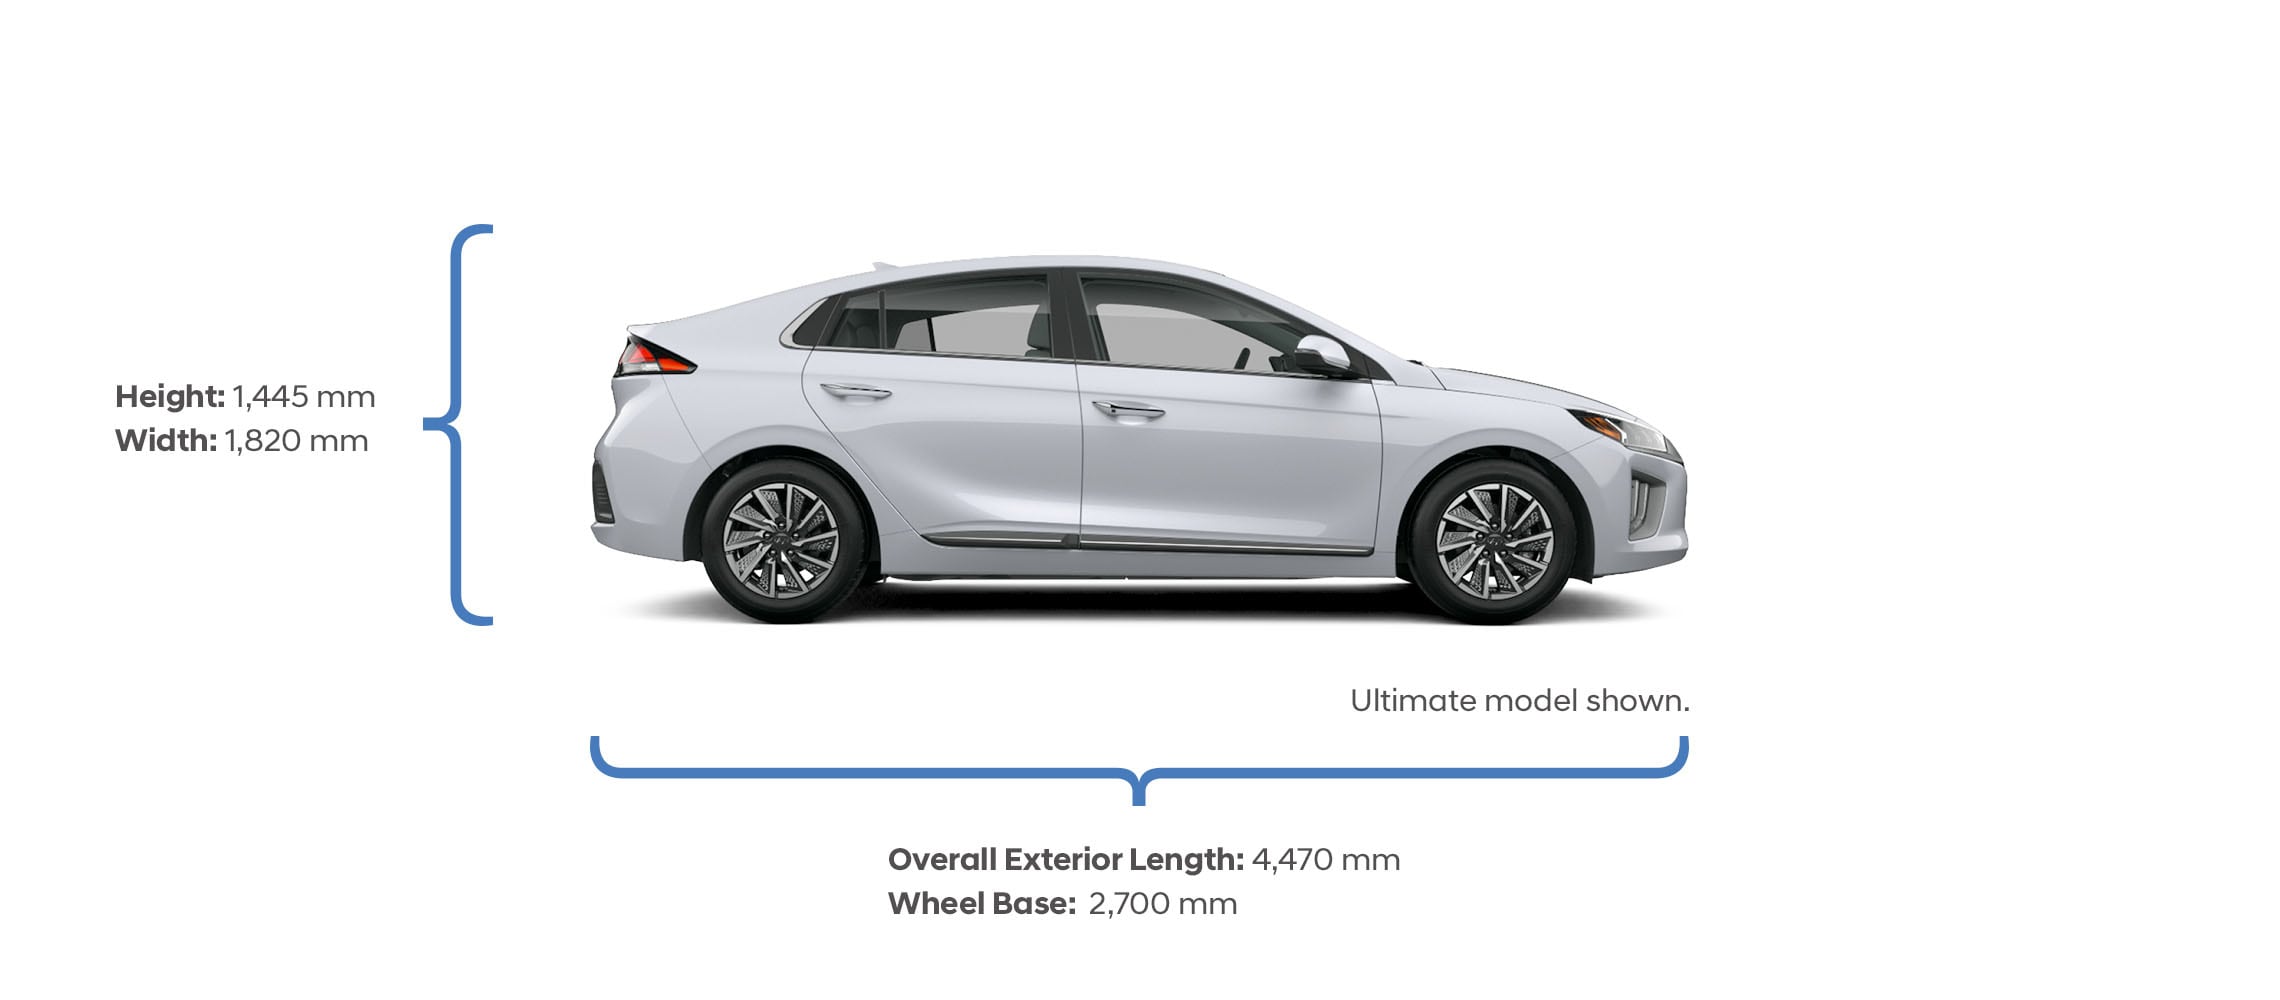 Height and width specifications of the 2021 IONIQ Electric